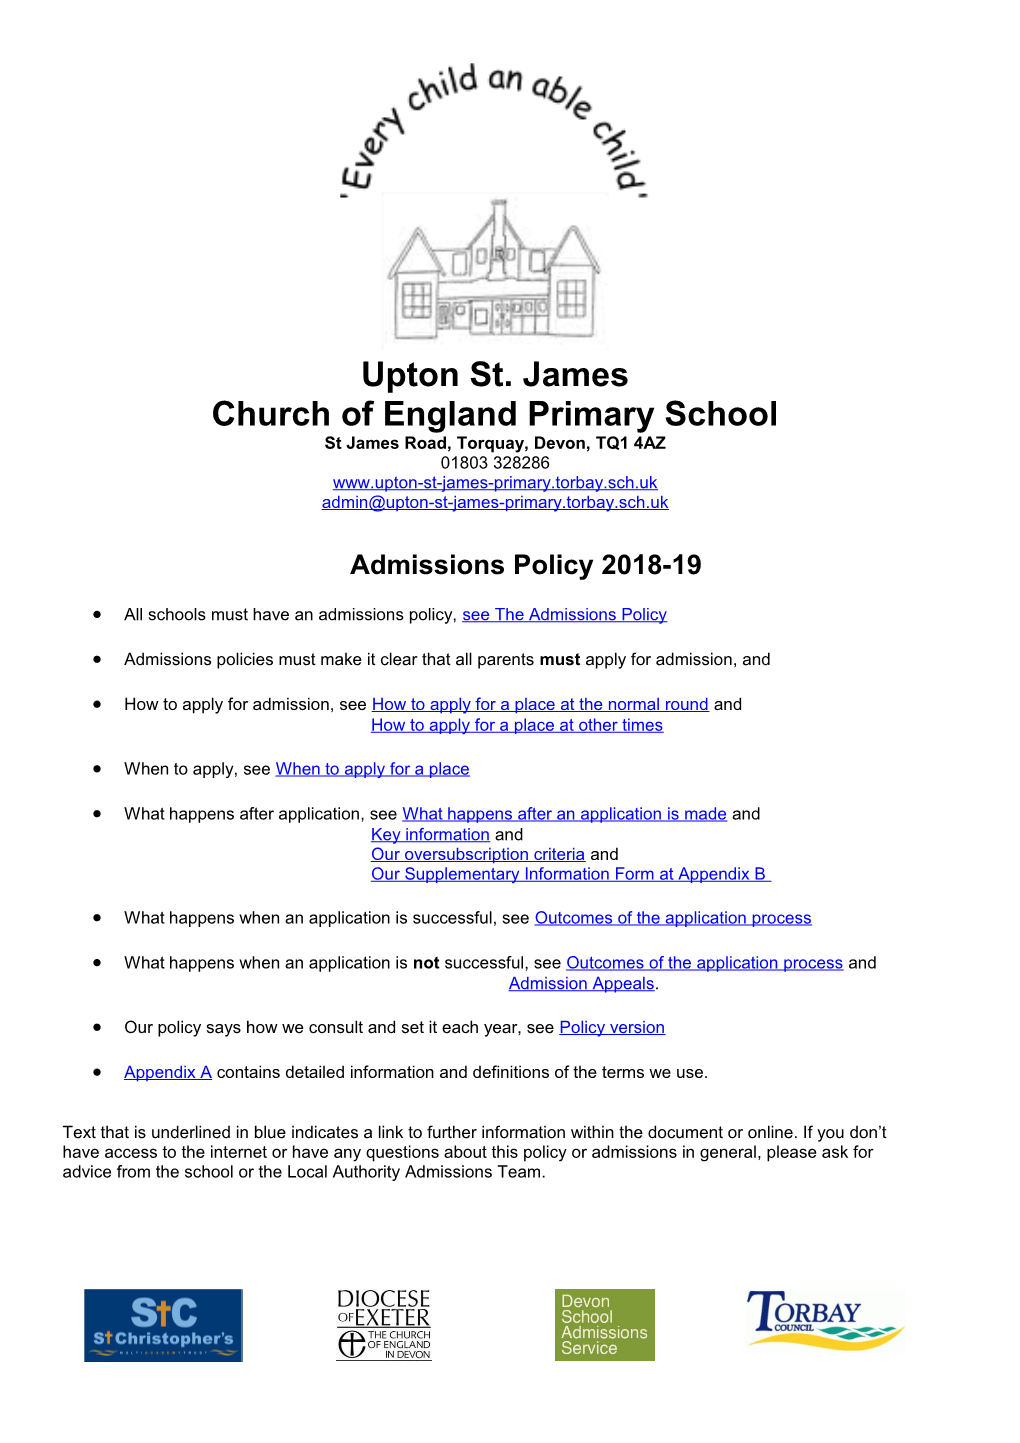 All Schools Must Have an Admissions Policy,See the Admissions Policy